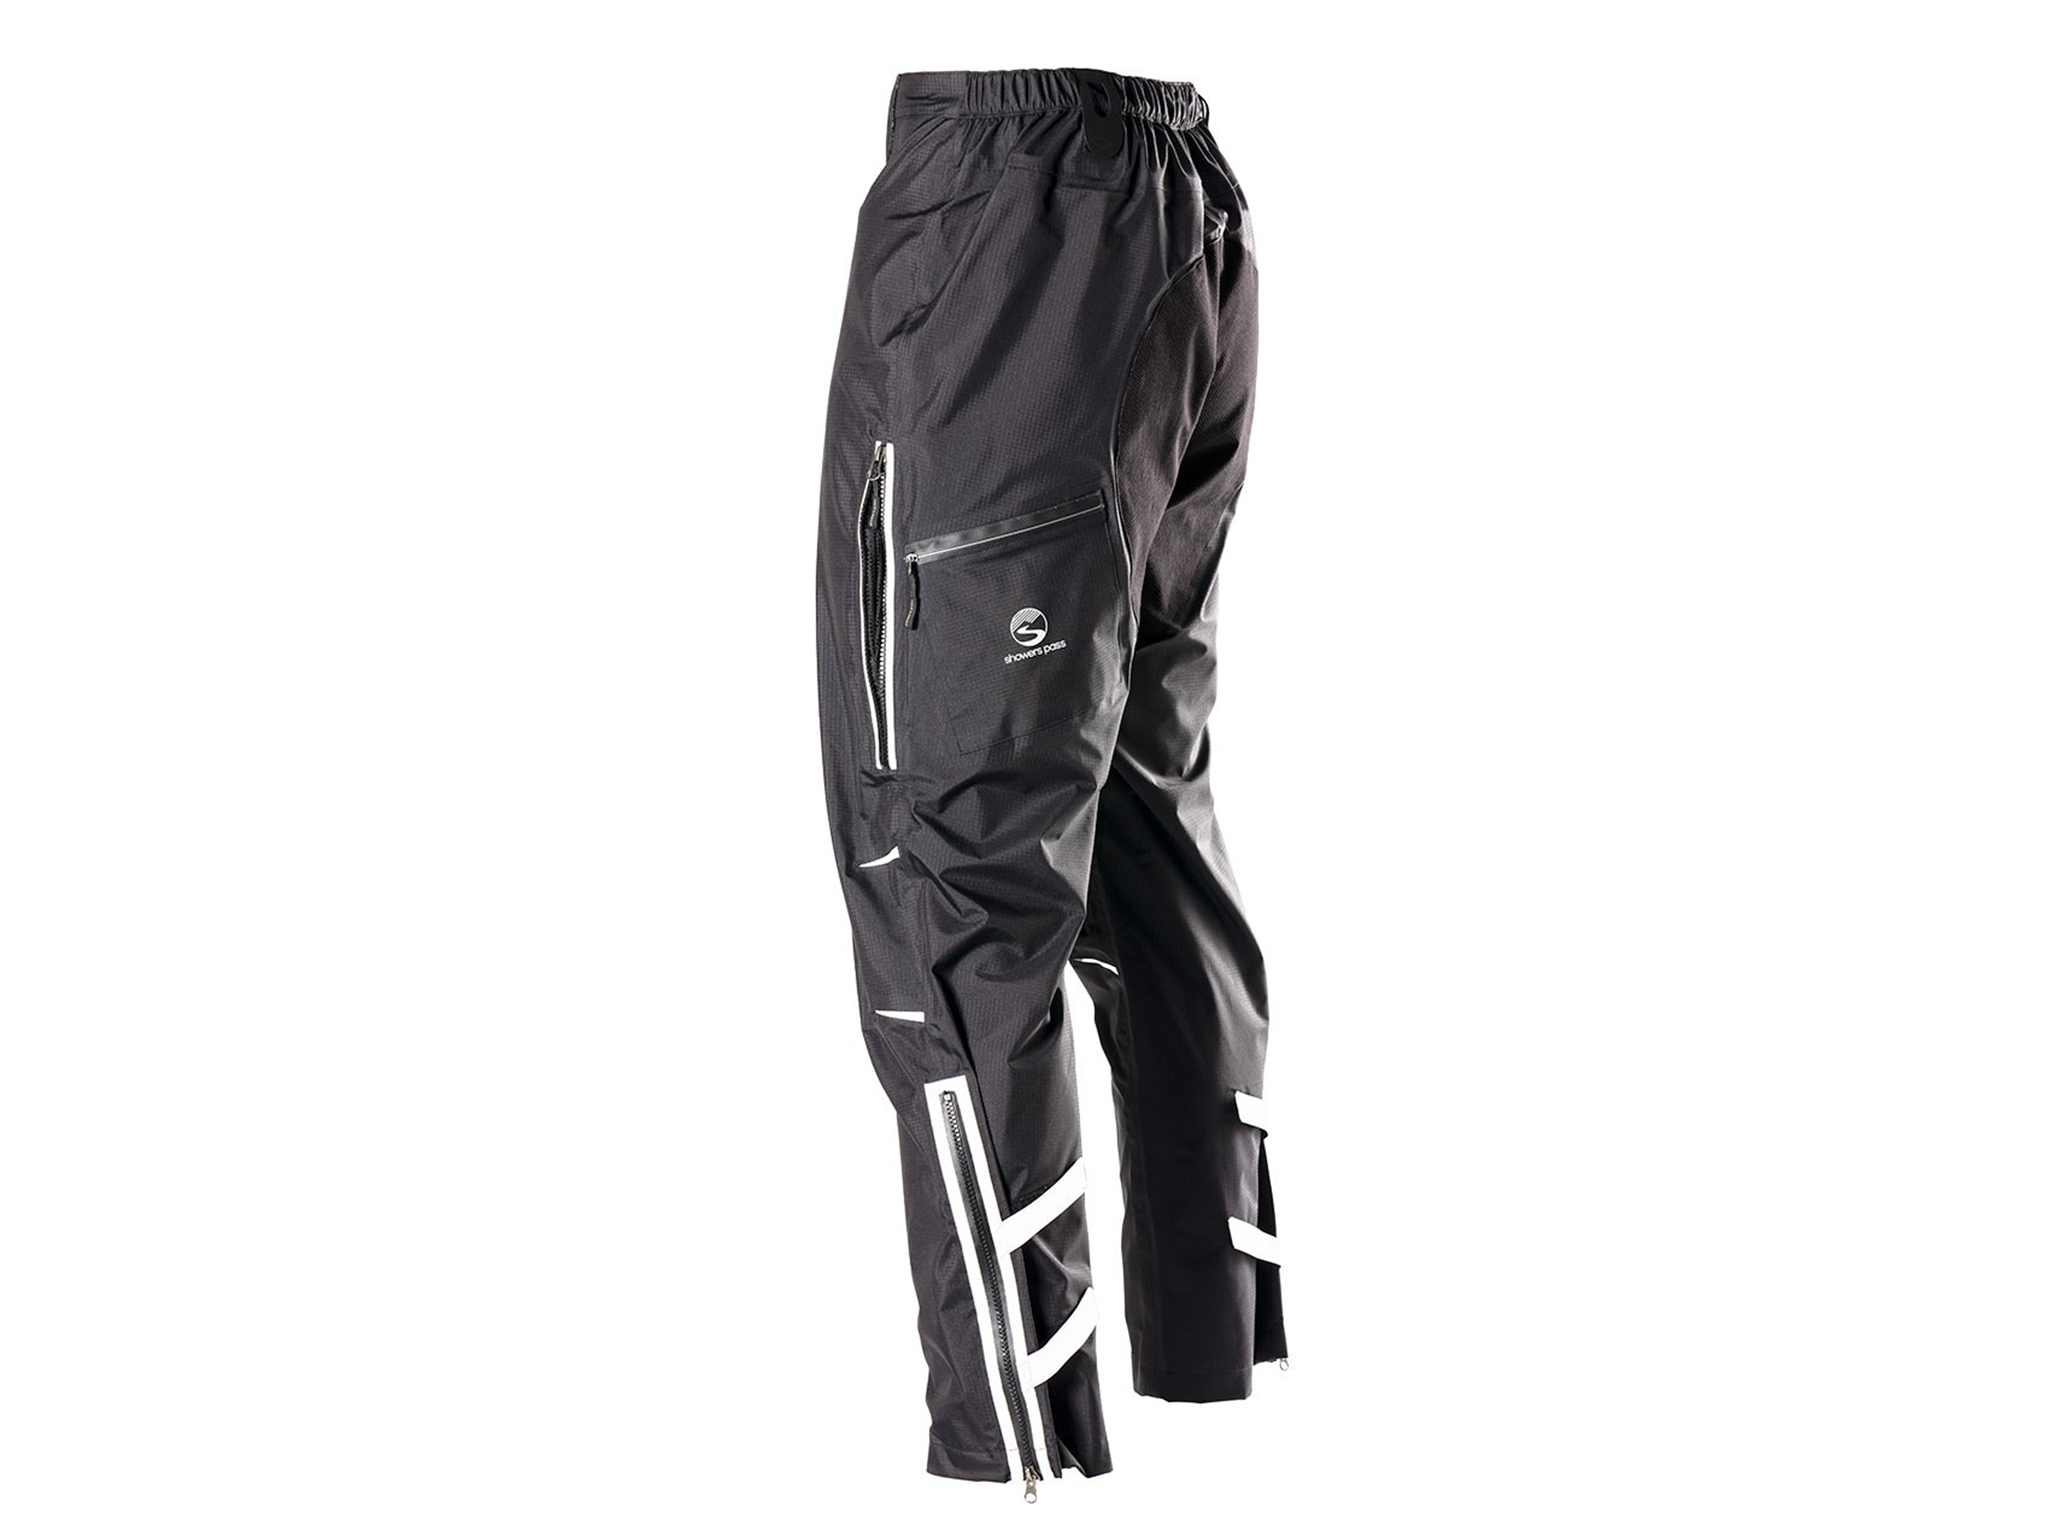 All Year Moab 2-in-1 cycling rain trousers